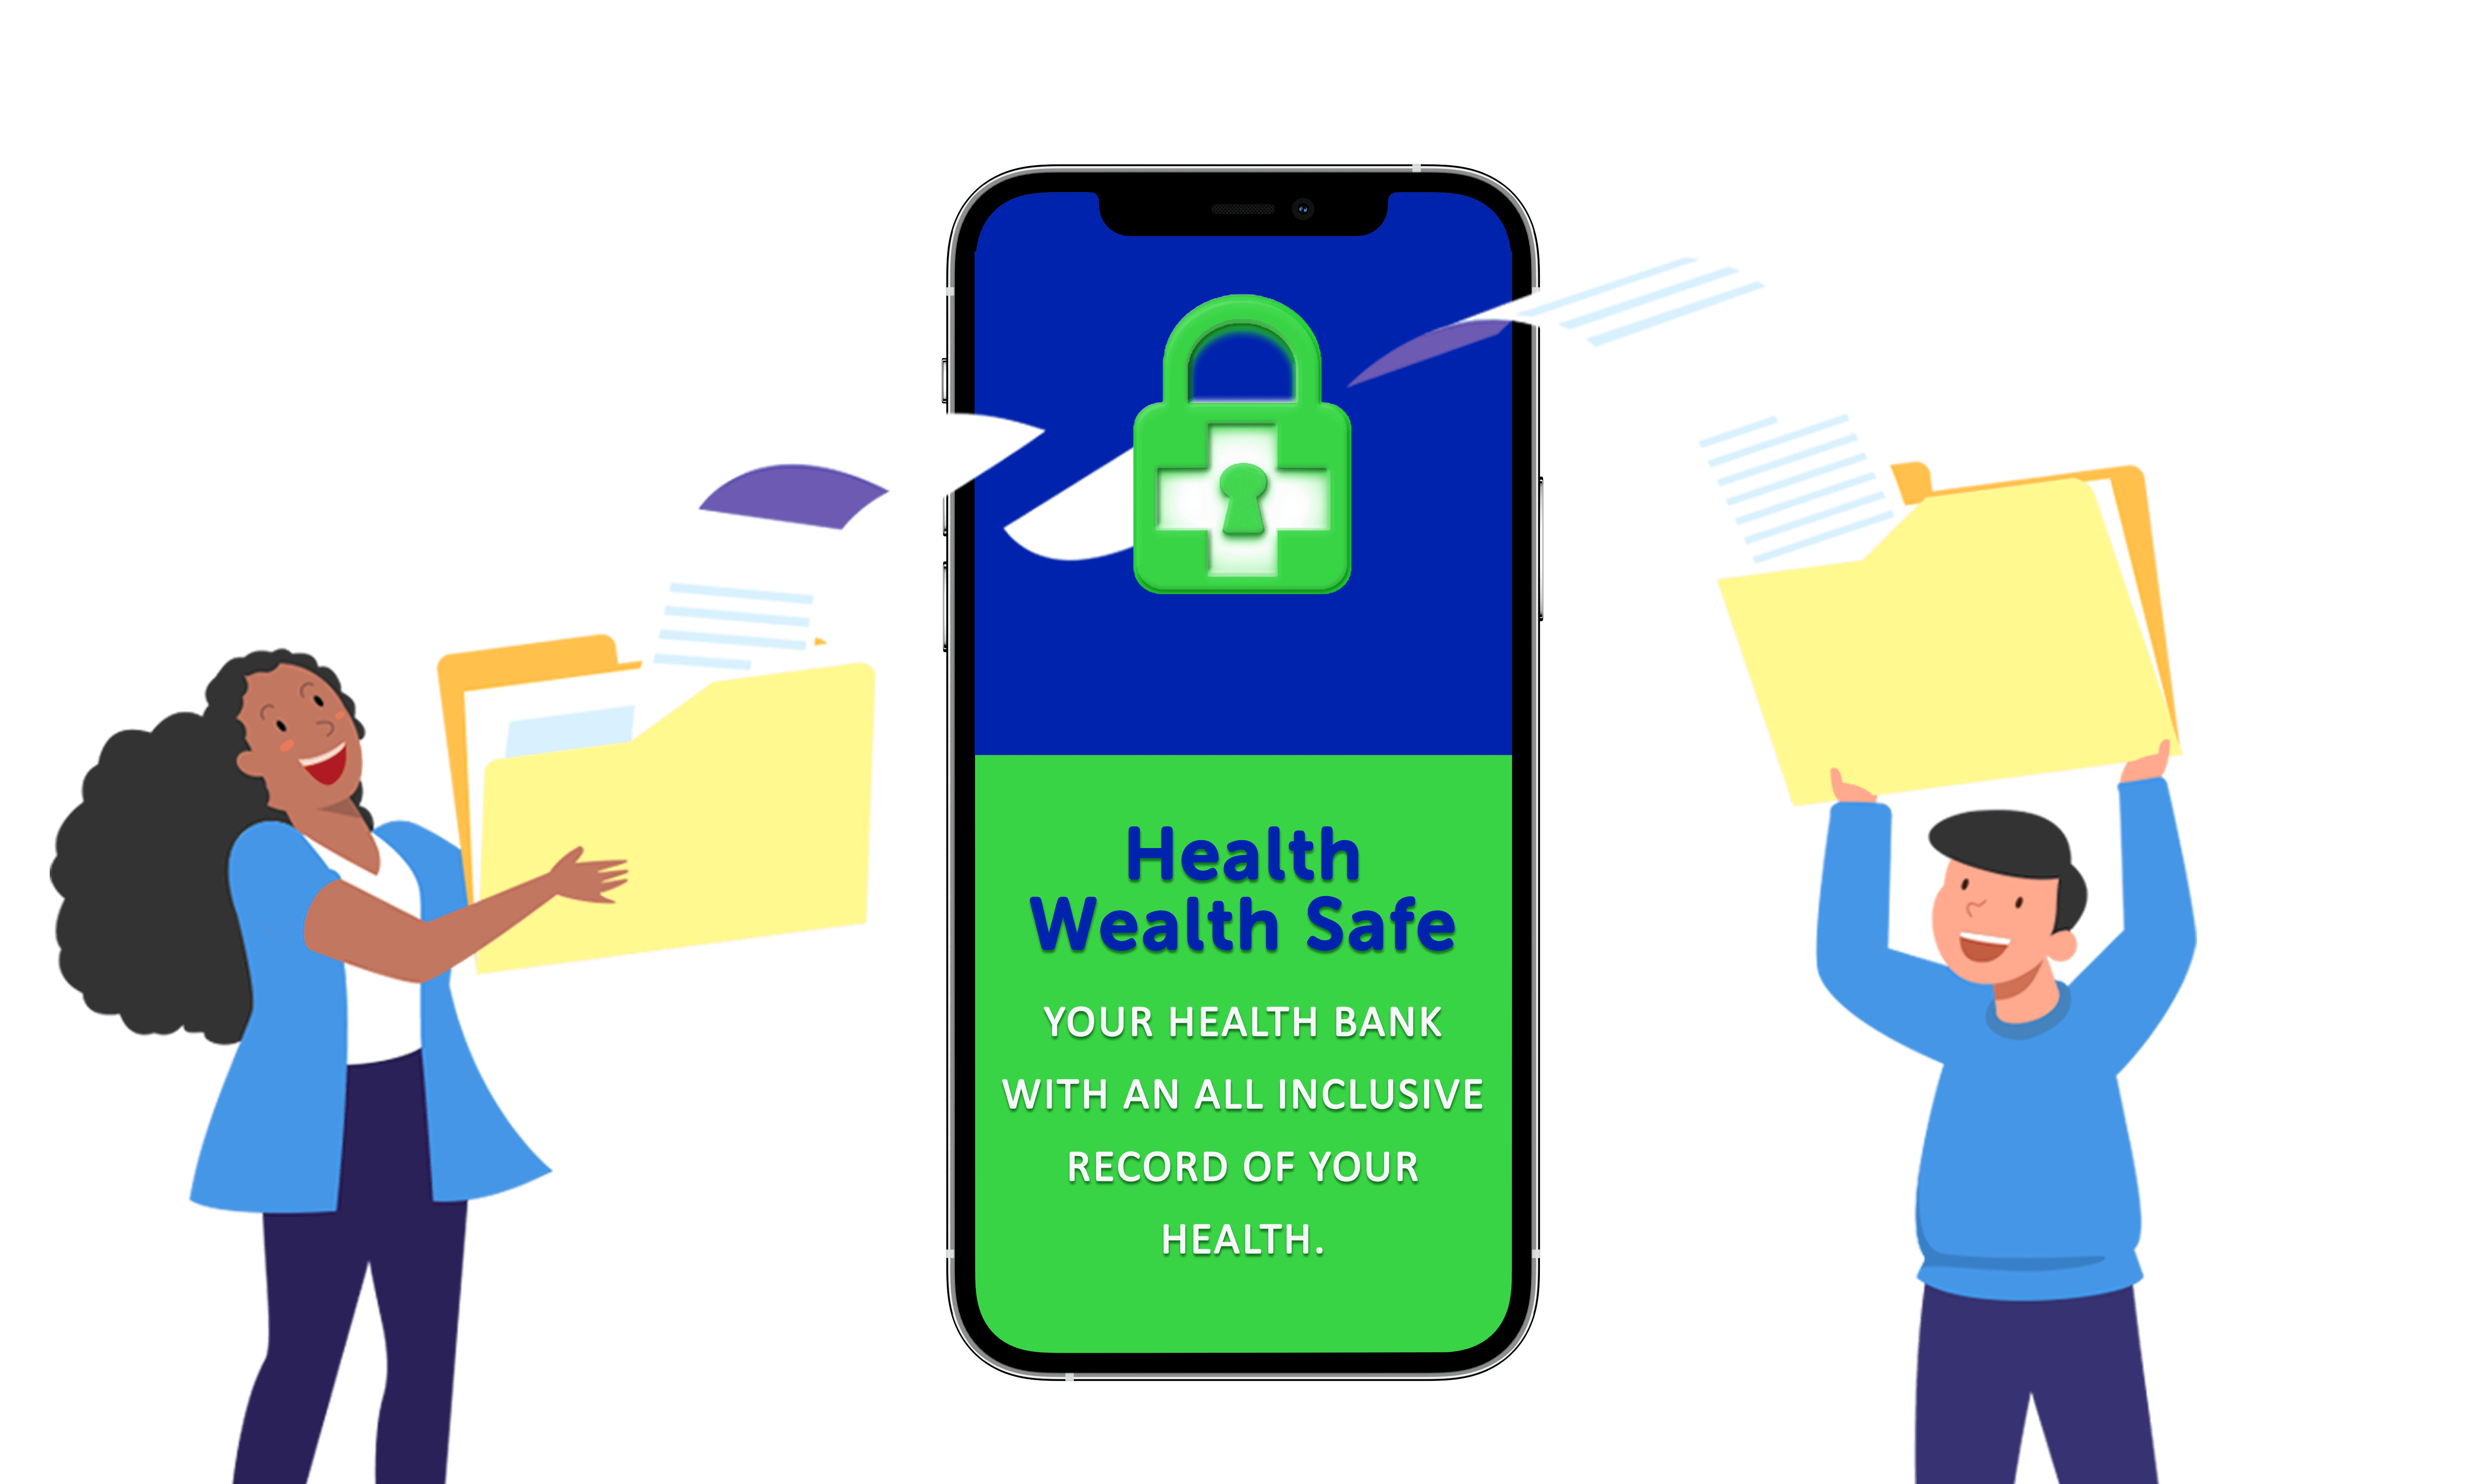 Health Wealth Safe bank record